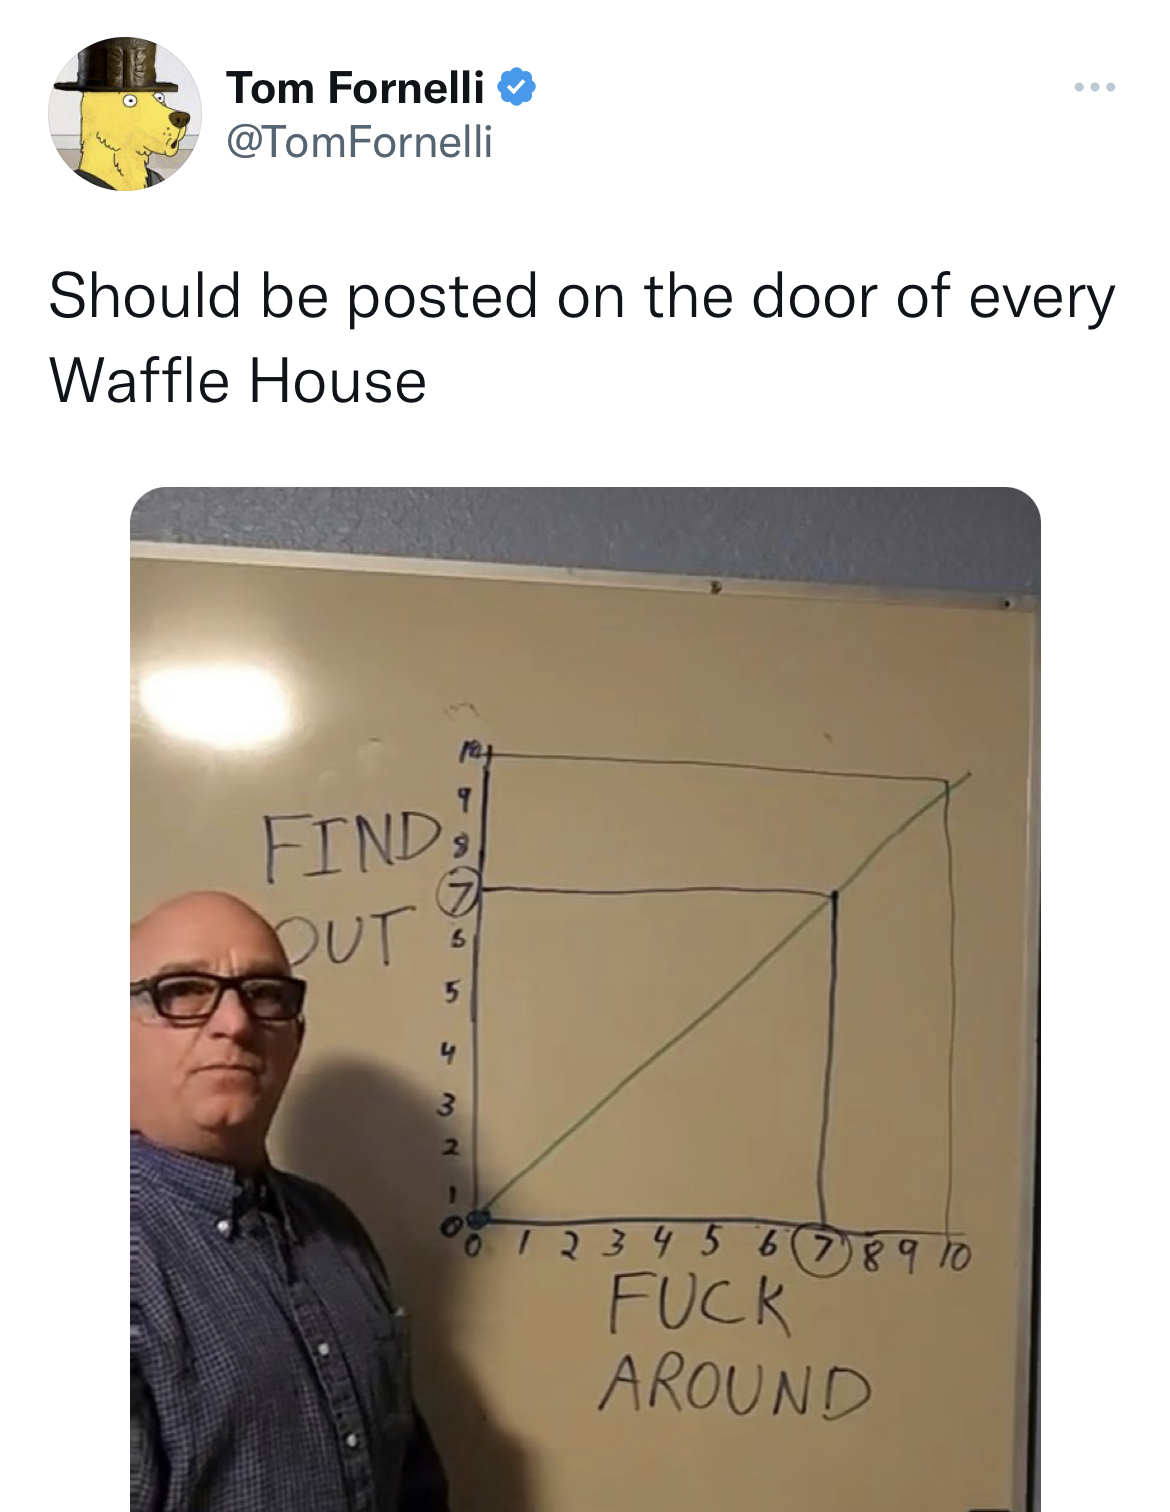 angle - Tom Fornelli Should be posted on the door of every Waffle House Find Out 310 1 2 3 4 5 6 7 8 9 10 Fuck Around